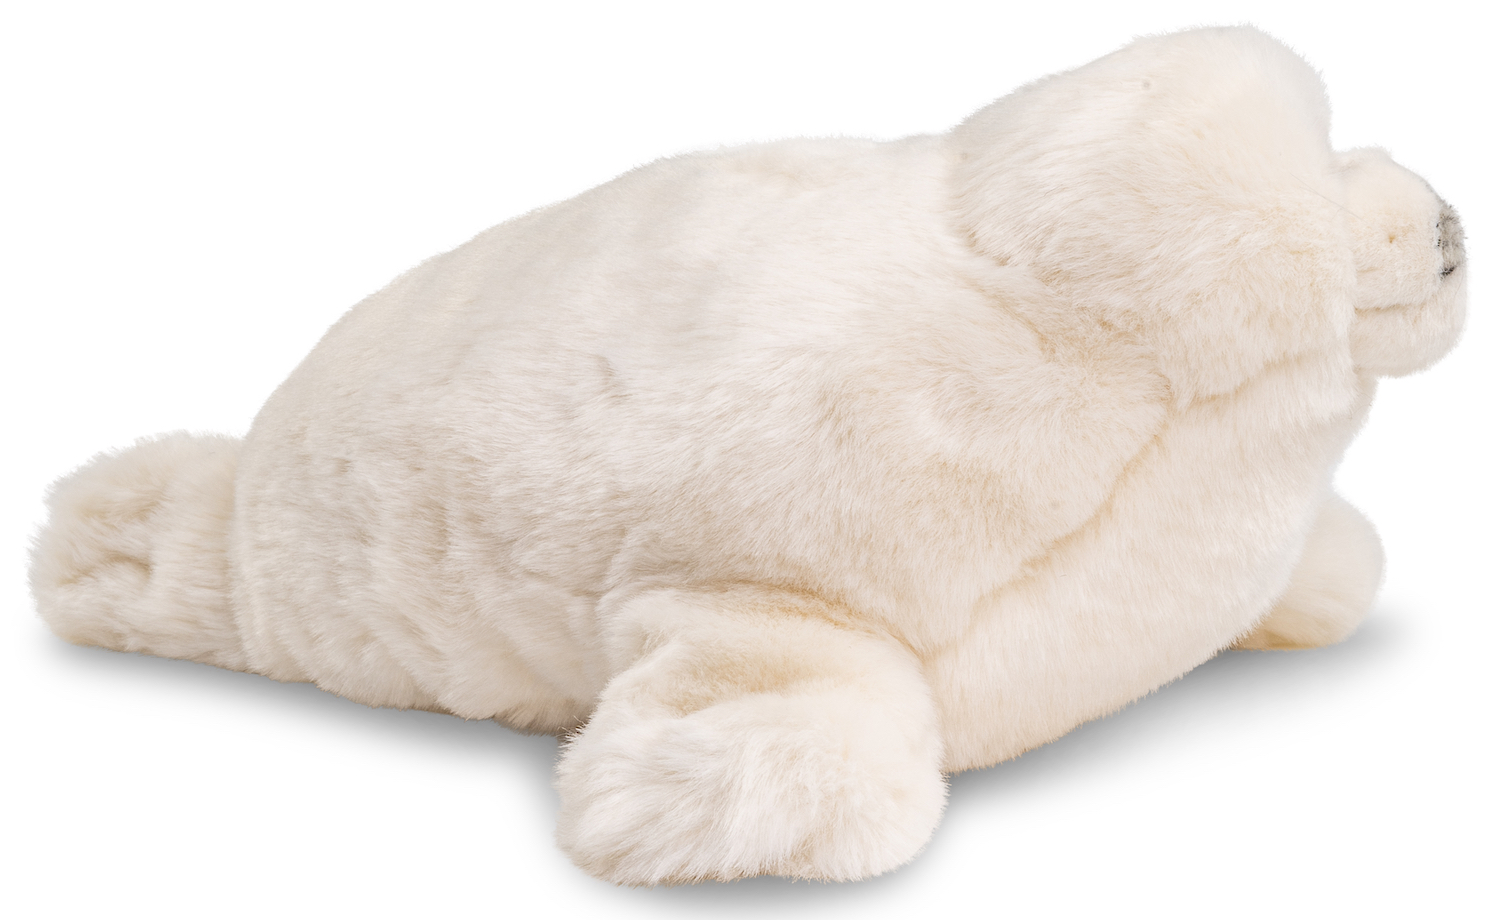 Seal White - 36 cm (length) - Plush Seal - Soft Toy, Cuddly Toy